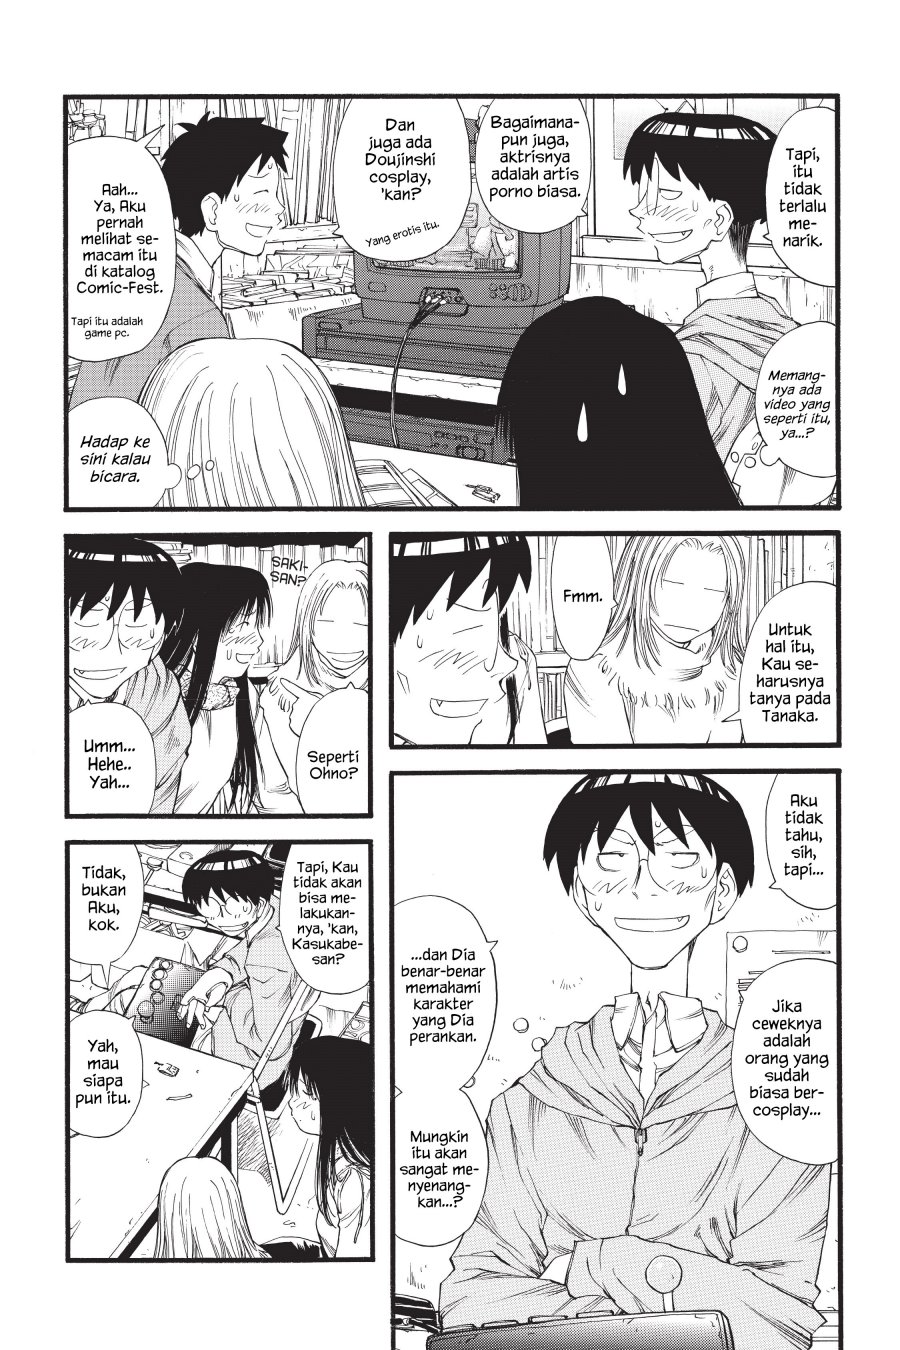 Genshiken – The Society for the Study of Modern Visual Culture Chapter 10 Image 13